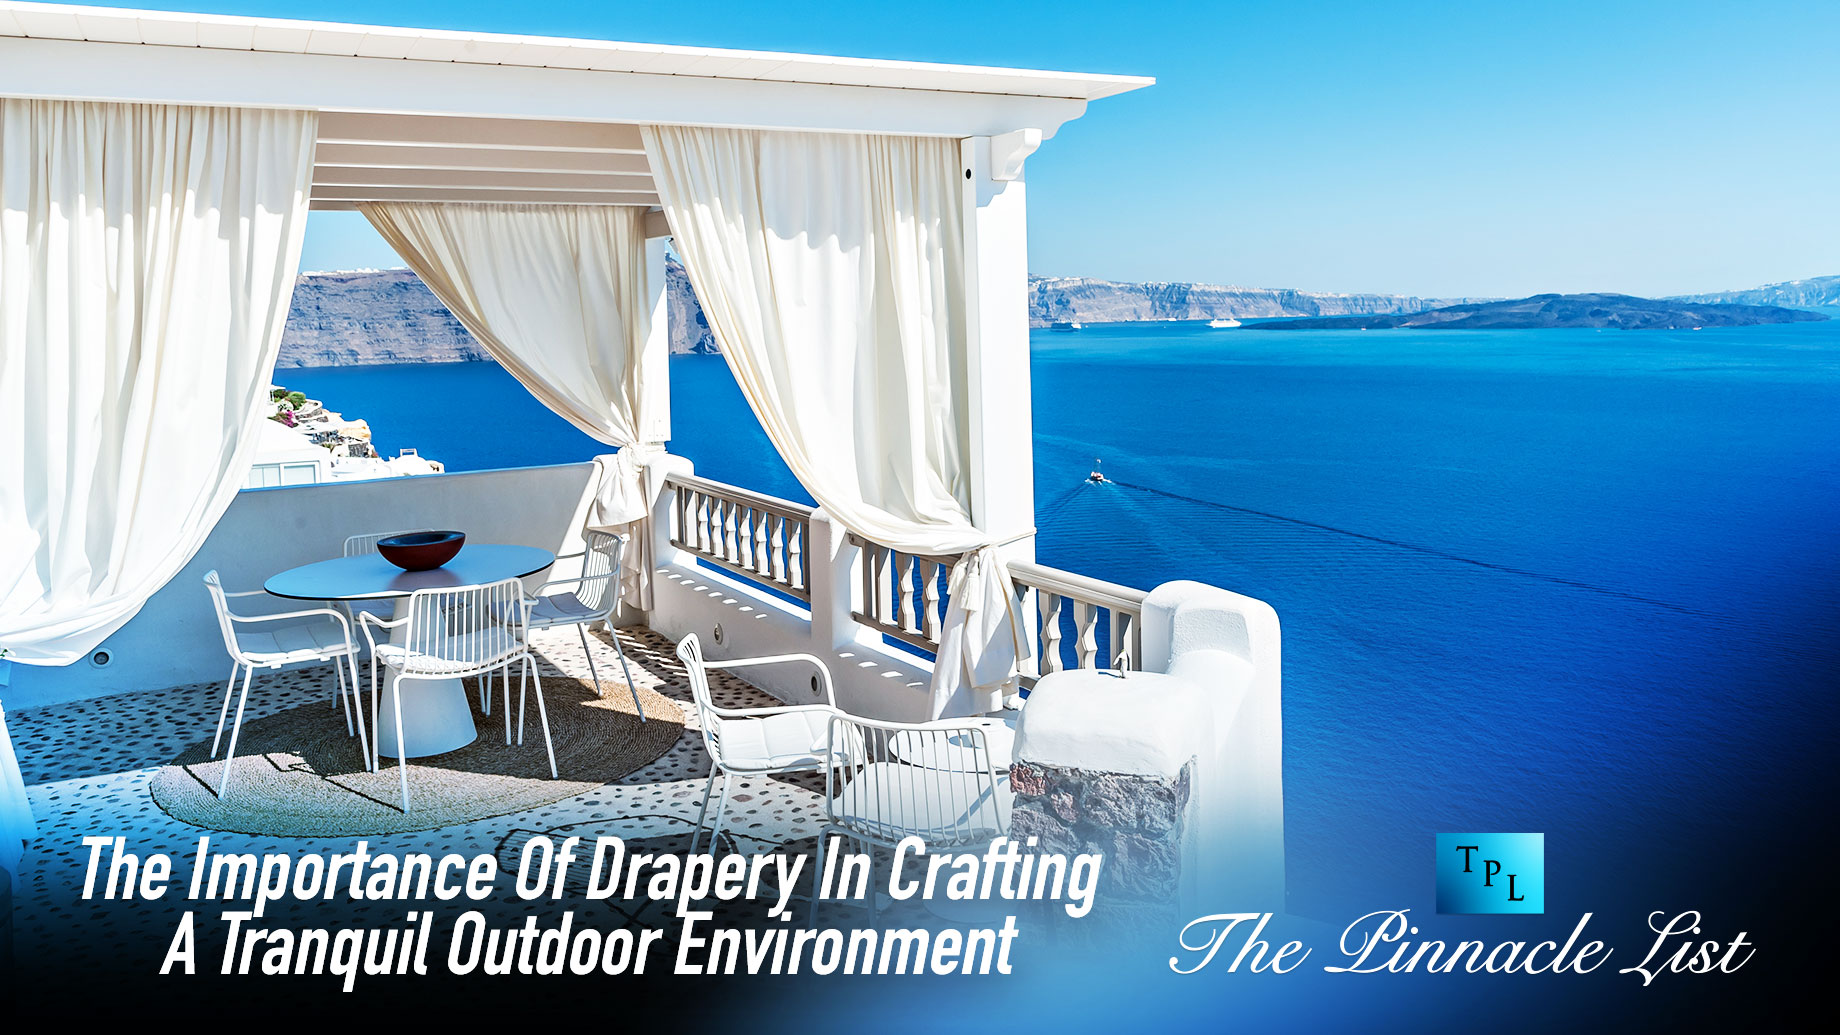 The Importance Of Drapery In Crafting A Tranquil Outdoor Environment